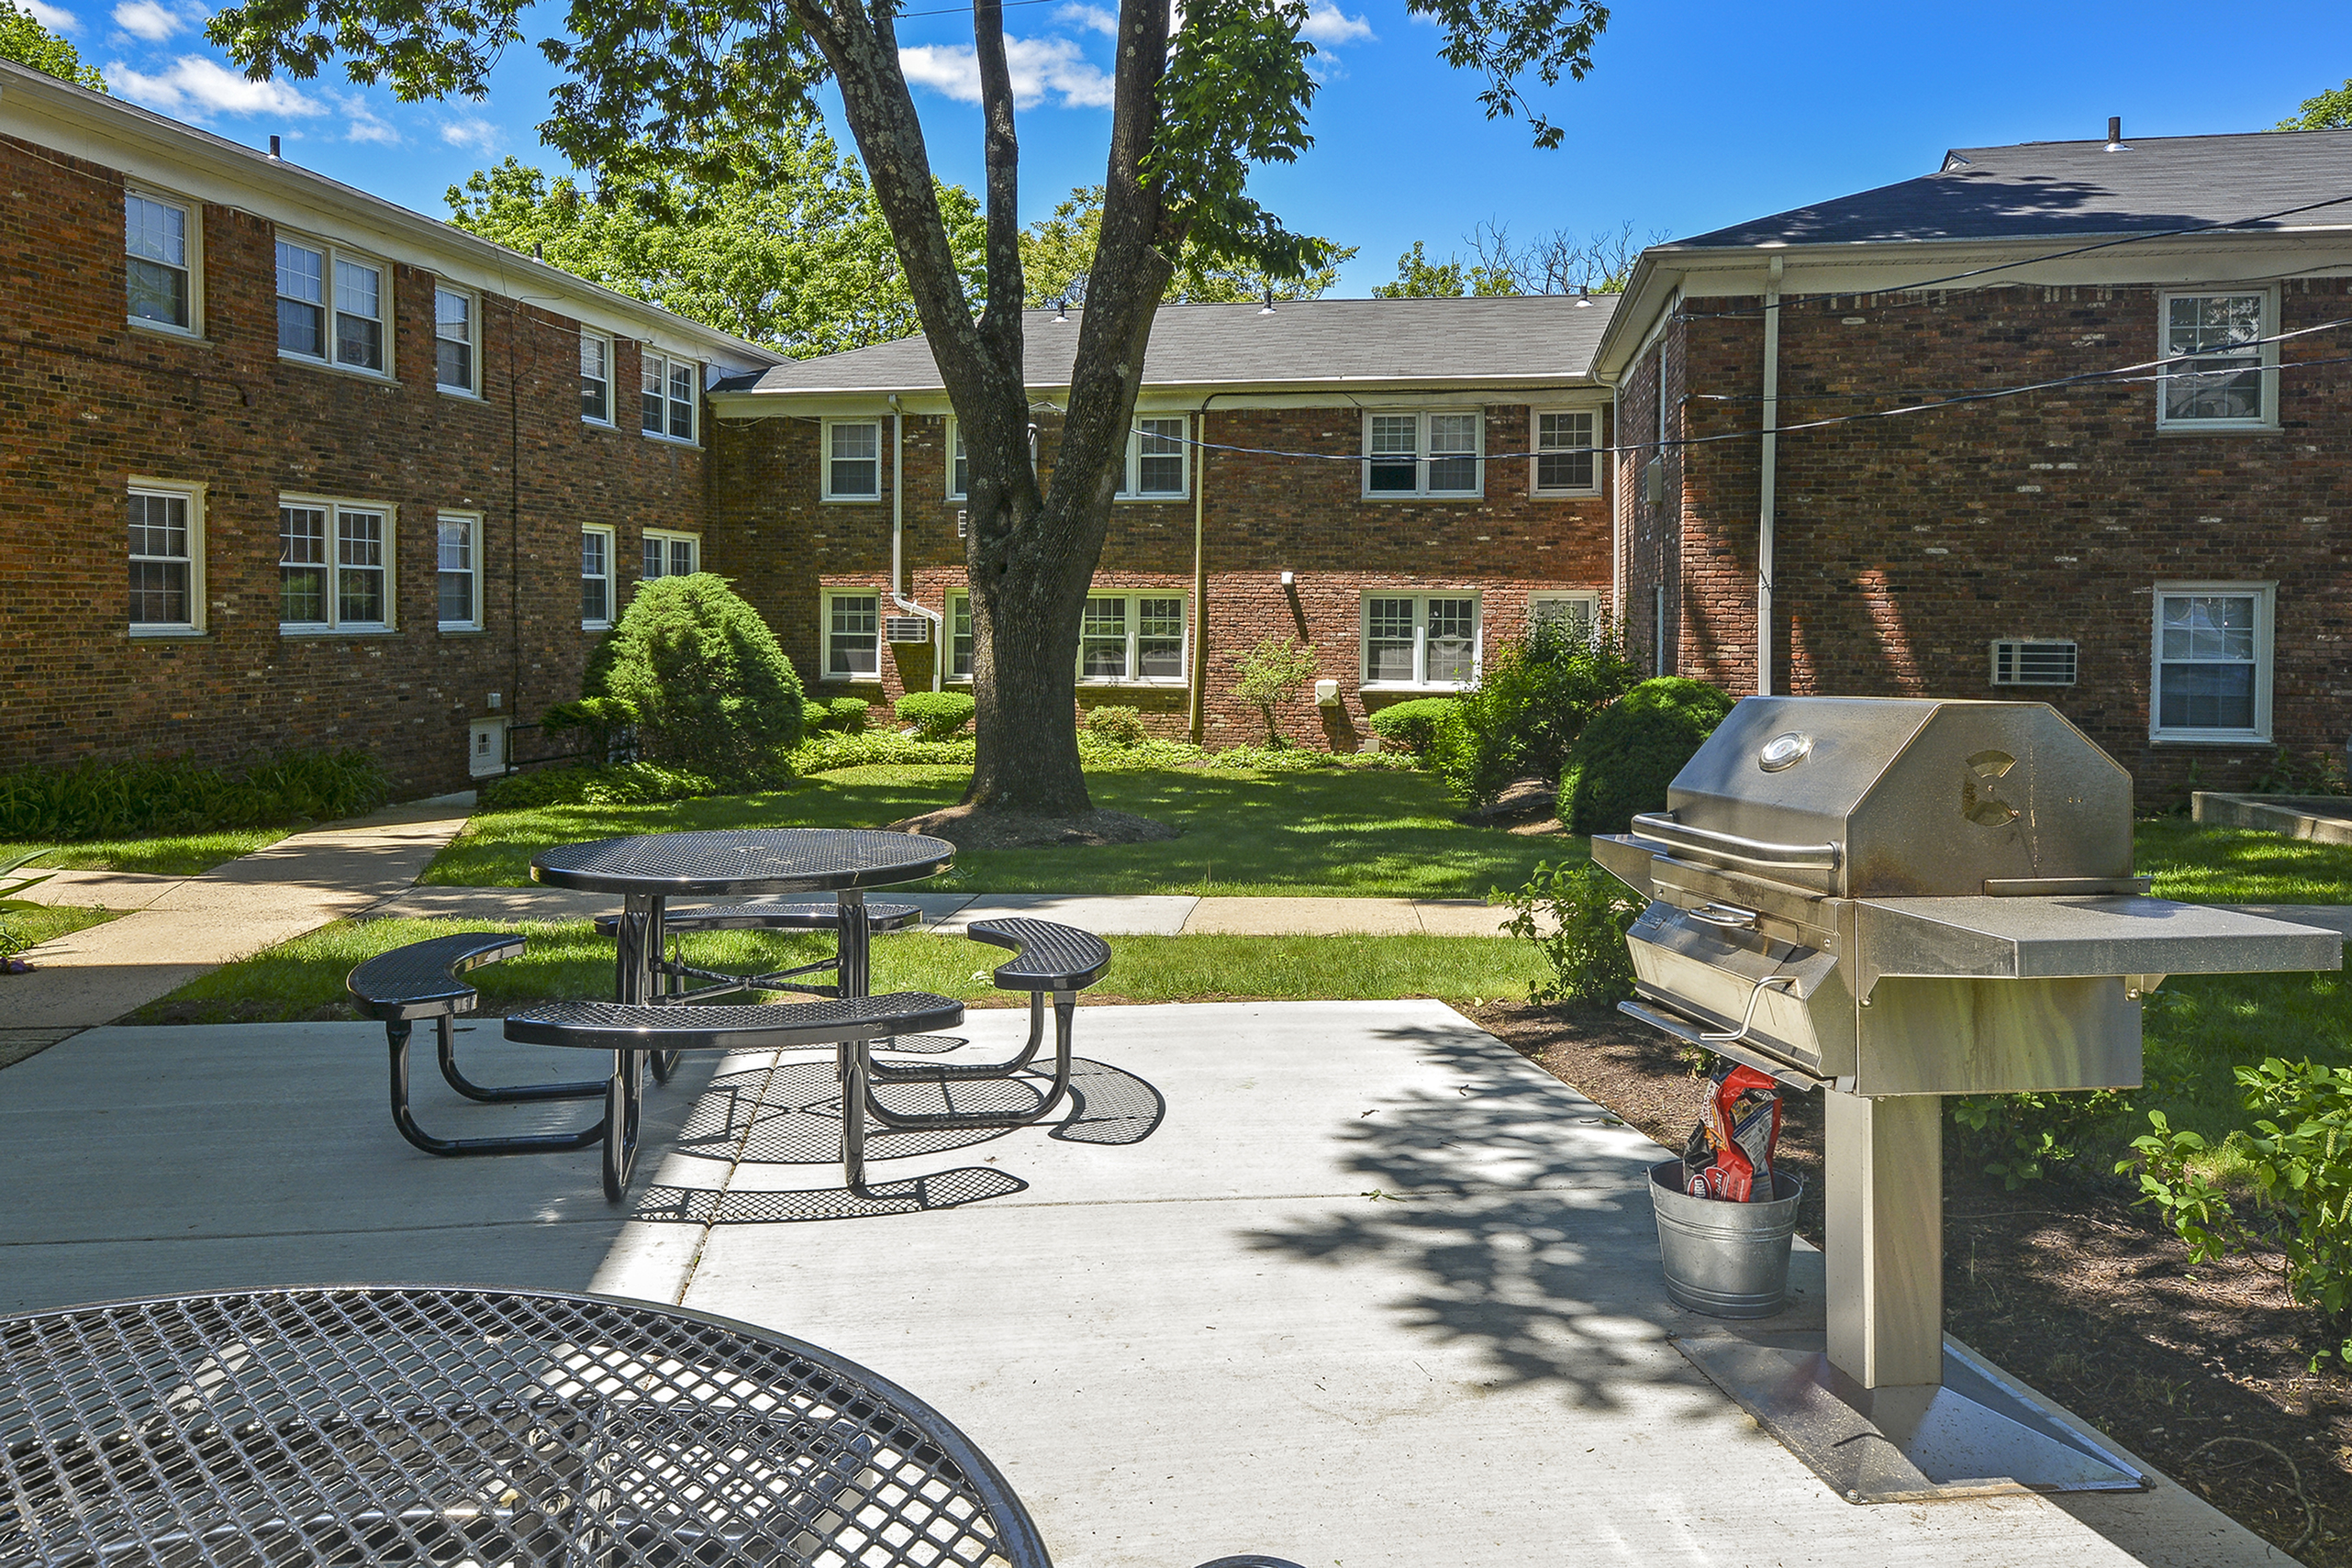 Wonderful barbeque and picnic areas within The Parc at Summit apartment grounds for residents in Summit, NJ